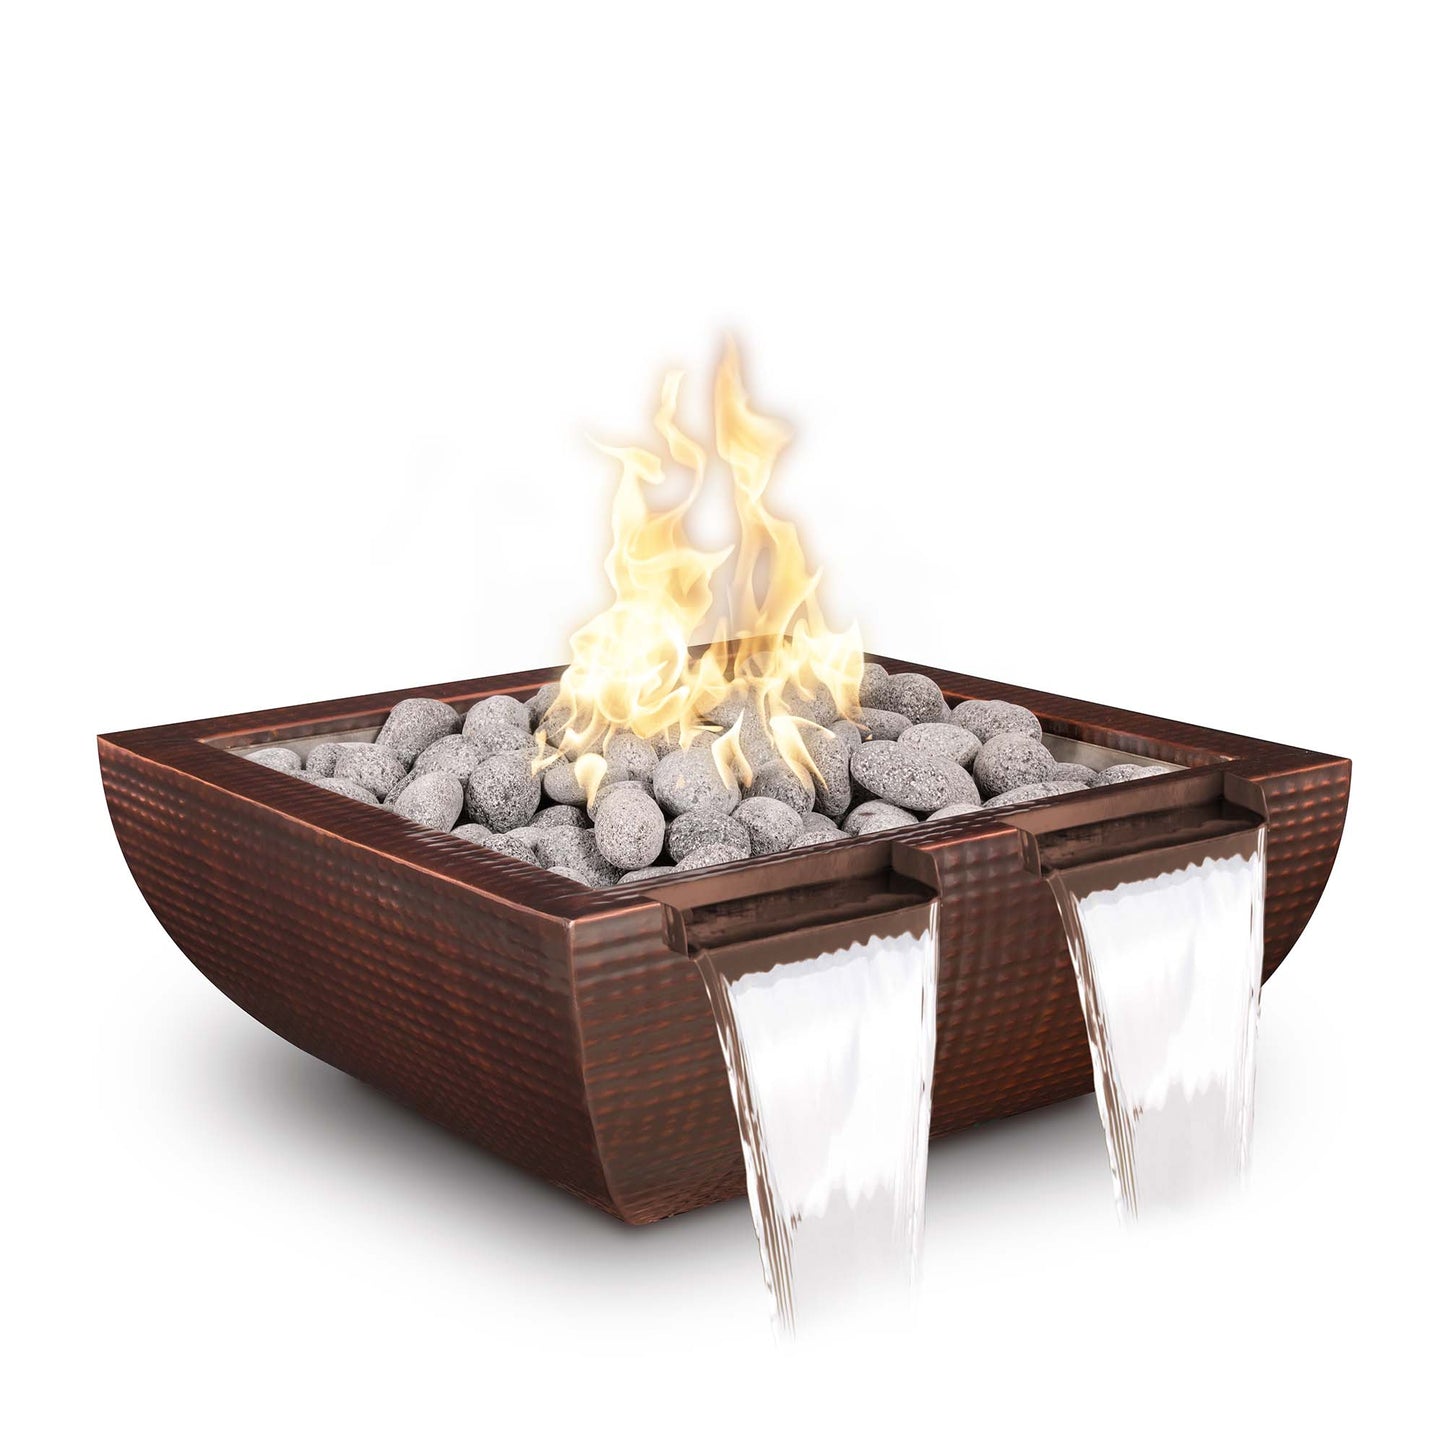 The Outdoor Plus Avalon Twin Spill 30" Gray Powder Coated Metal Natural Gas Fire & Water Bowl with Match Lit Ignition